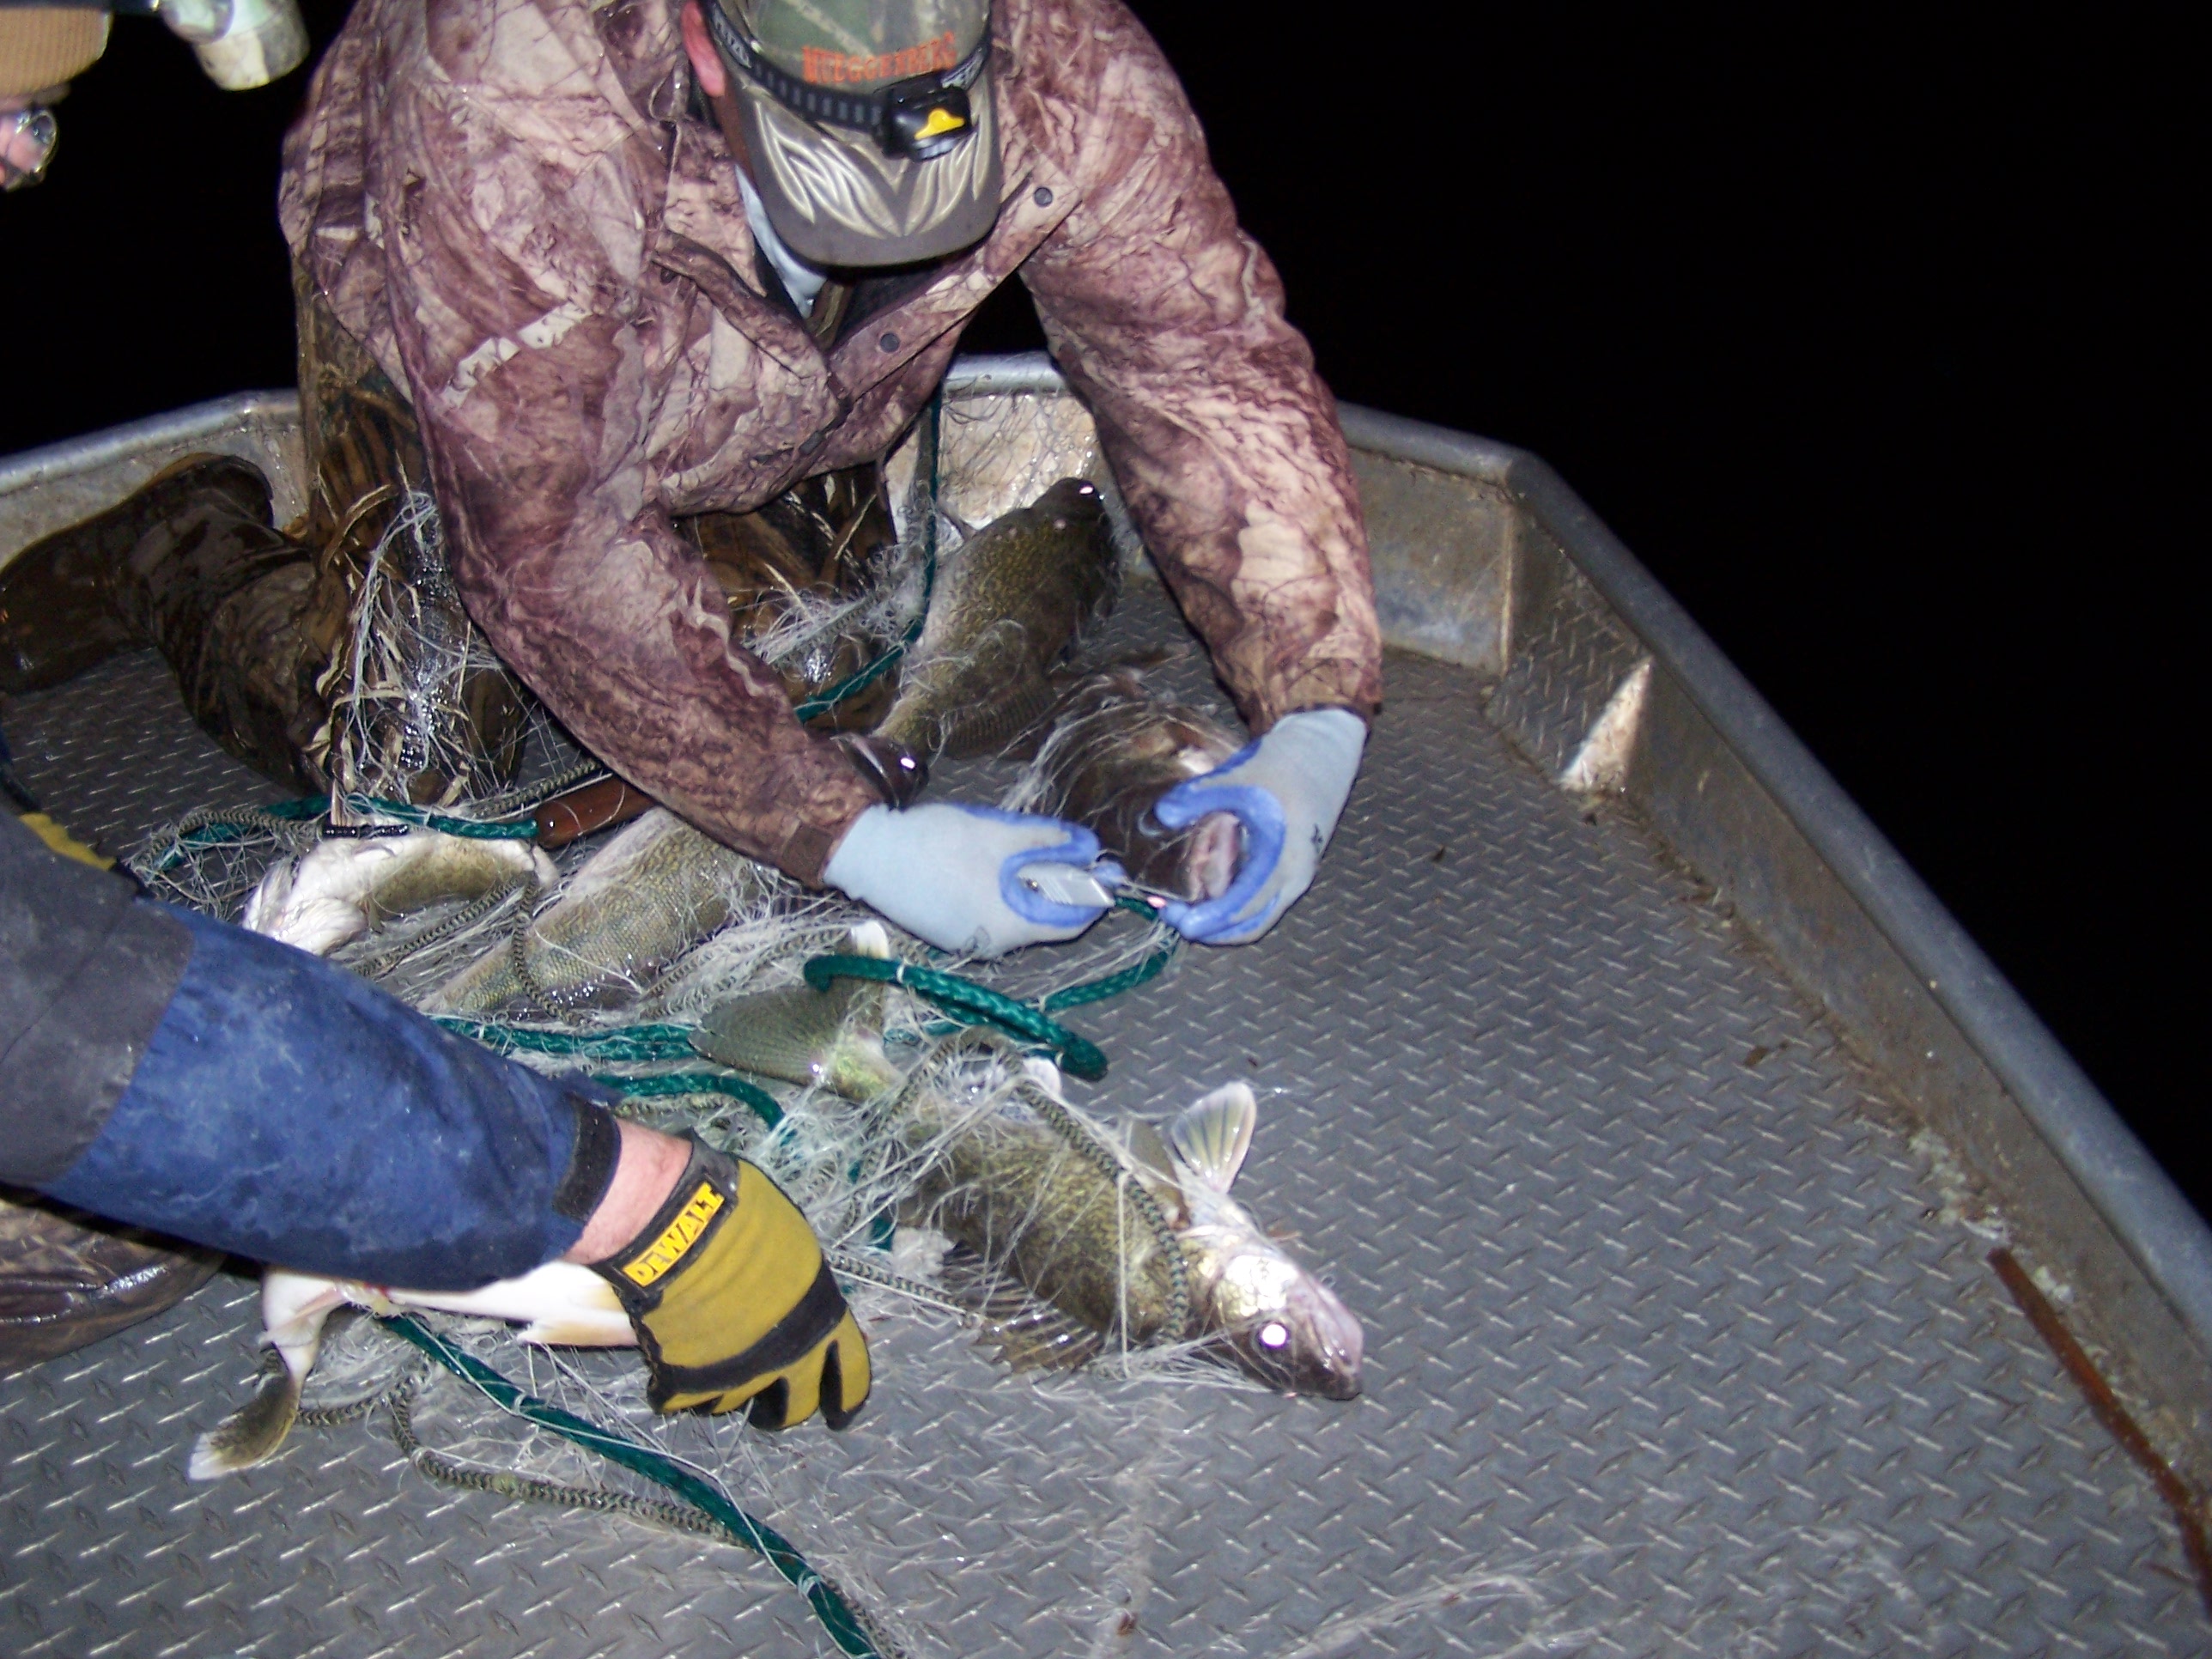 DNR fisheries staff conducting a gillnetting survey on walleyes in Spirit Lake.